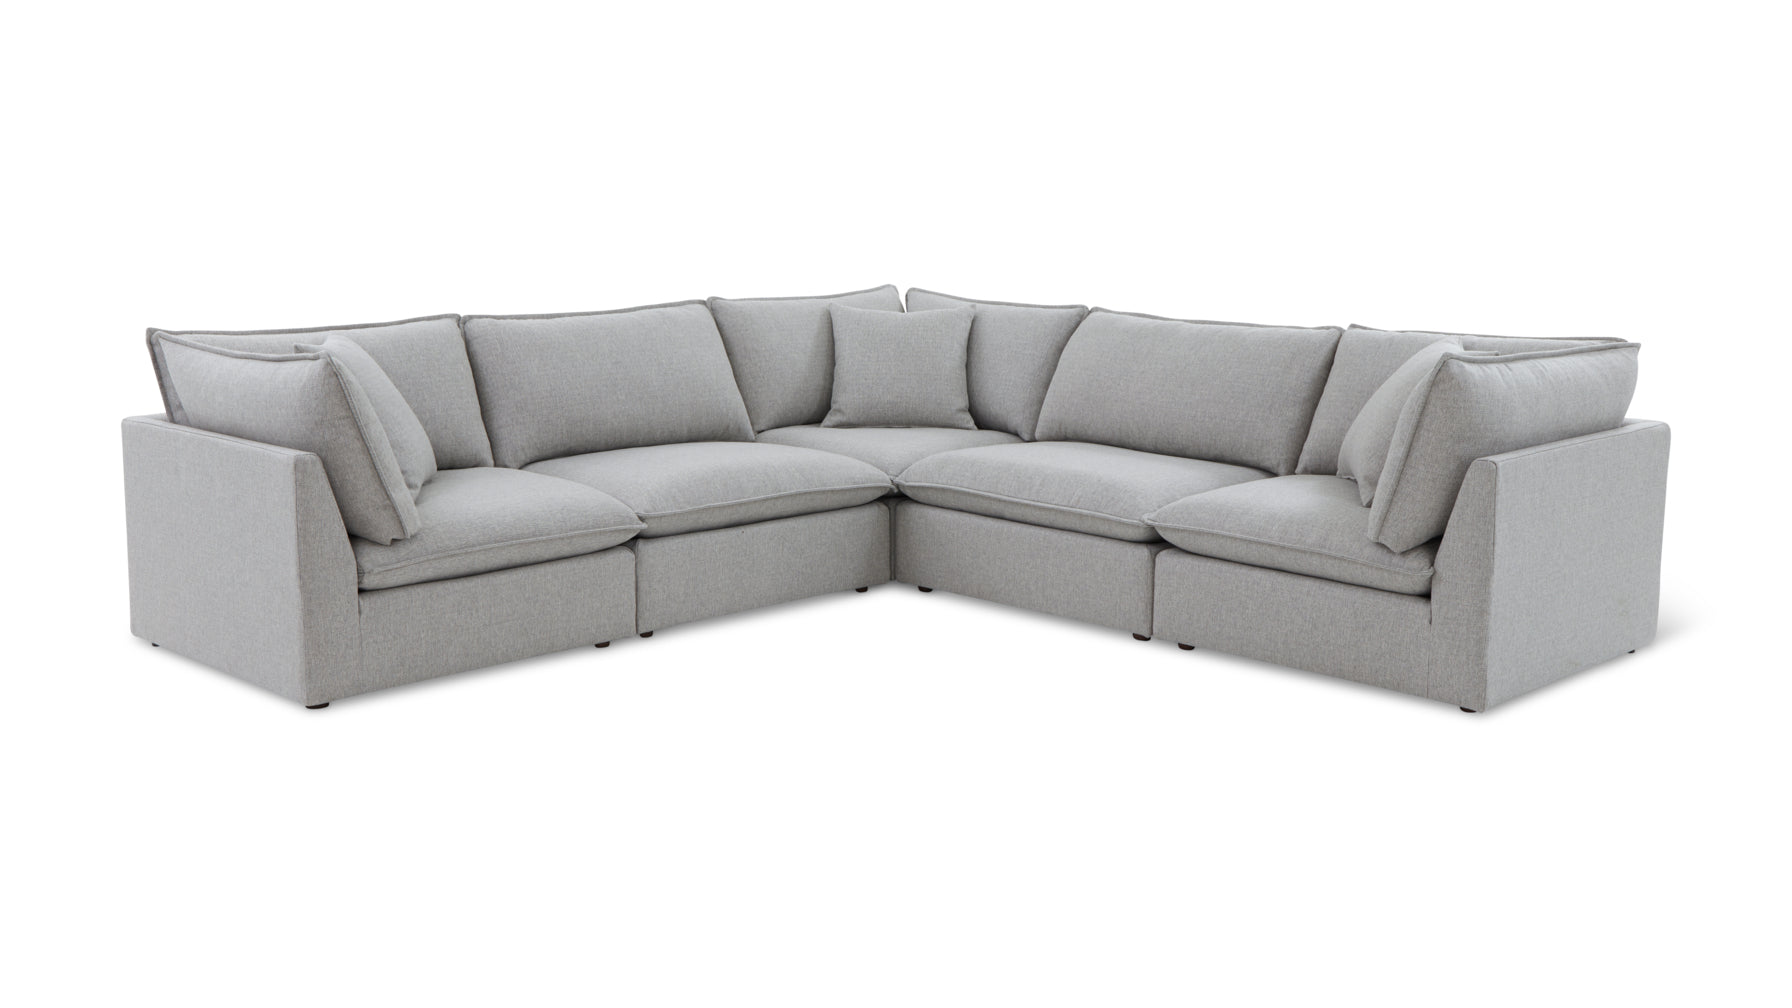 Chill Time 5-Piece Modular Sectional Closed, Heather - Image 2